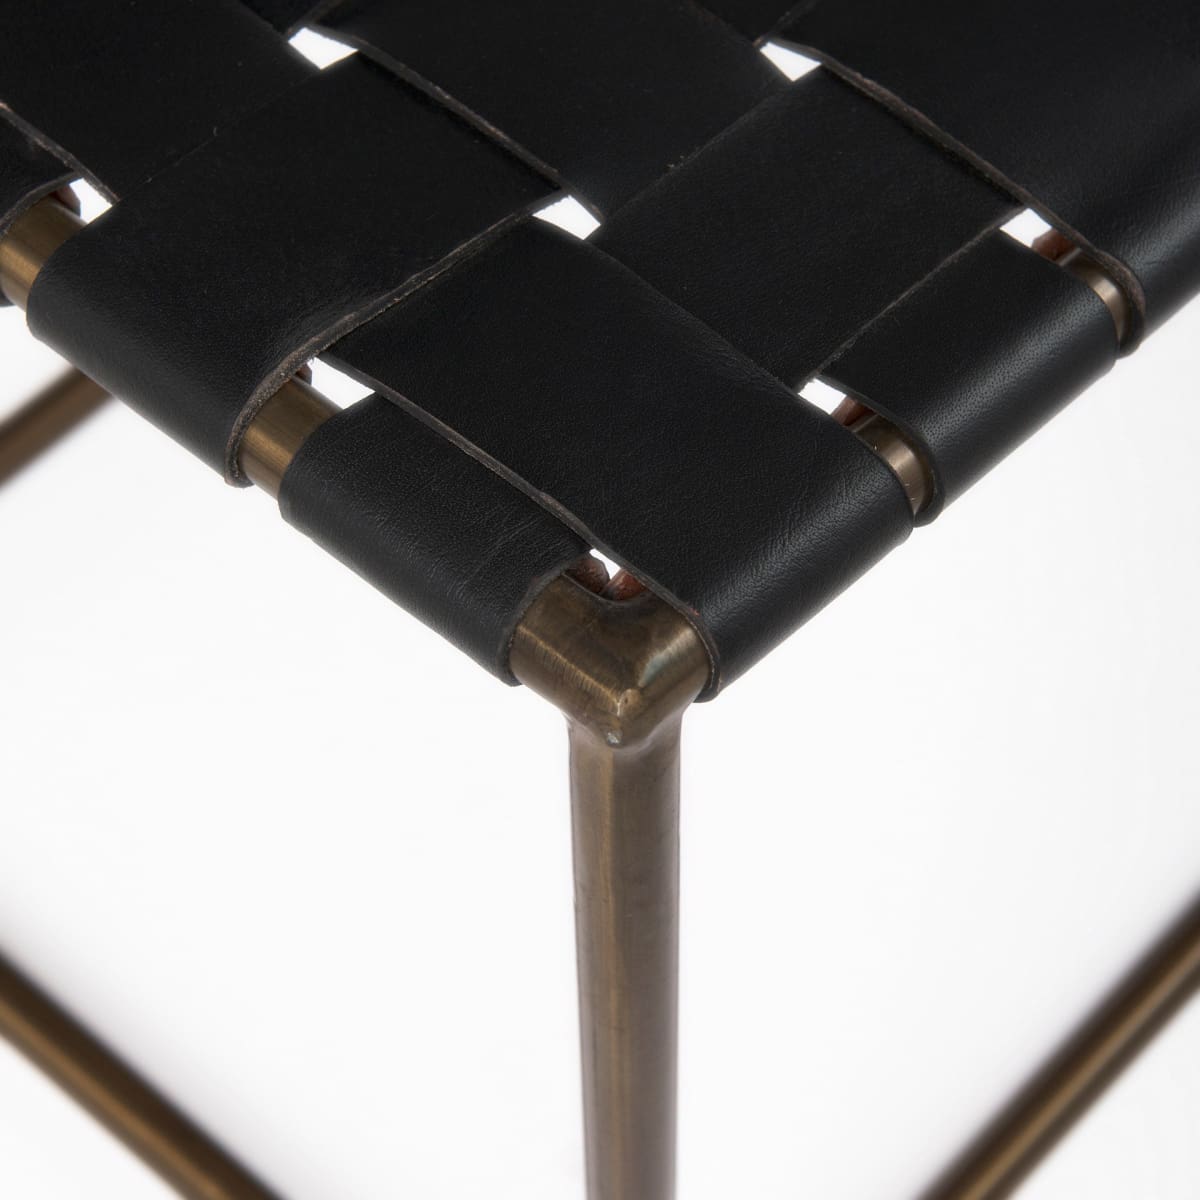 Clarissa Bench Black Leather | Gold Metal - benches